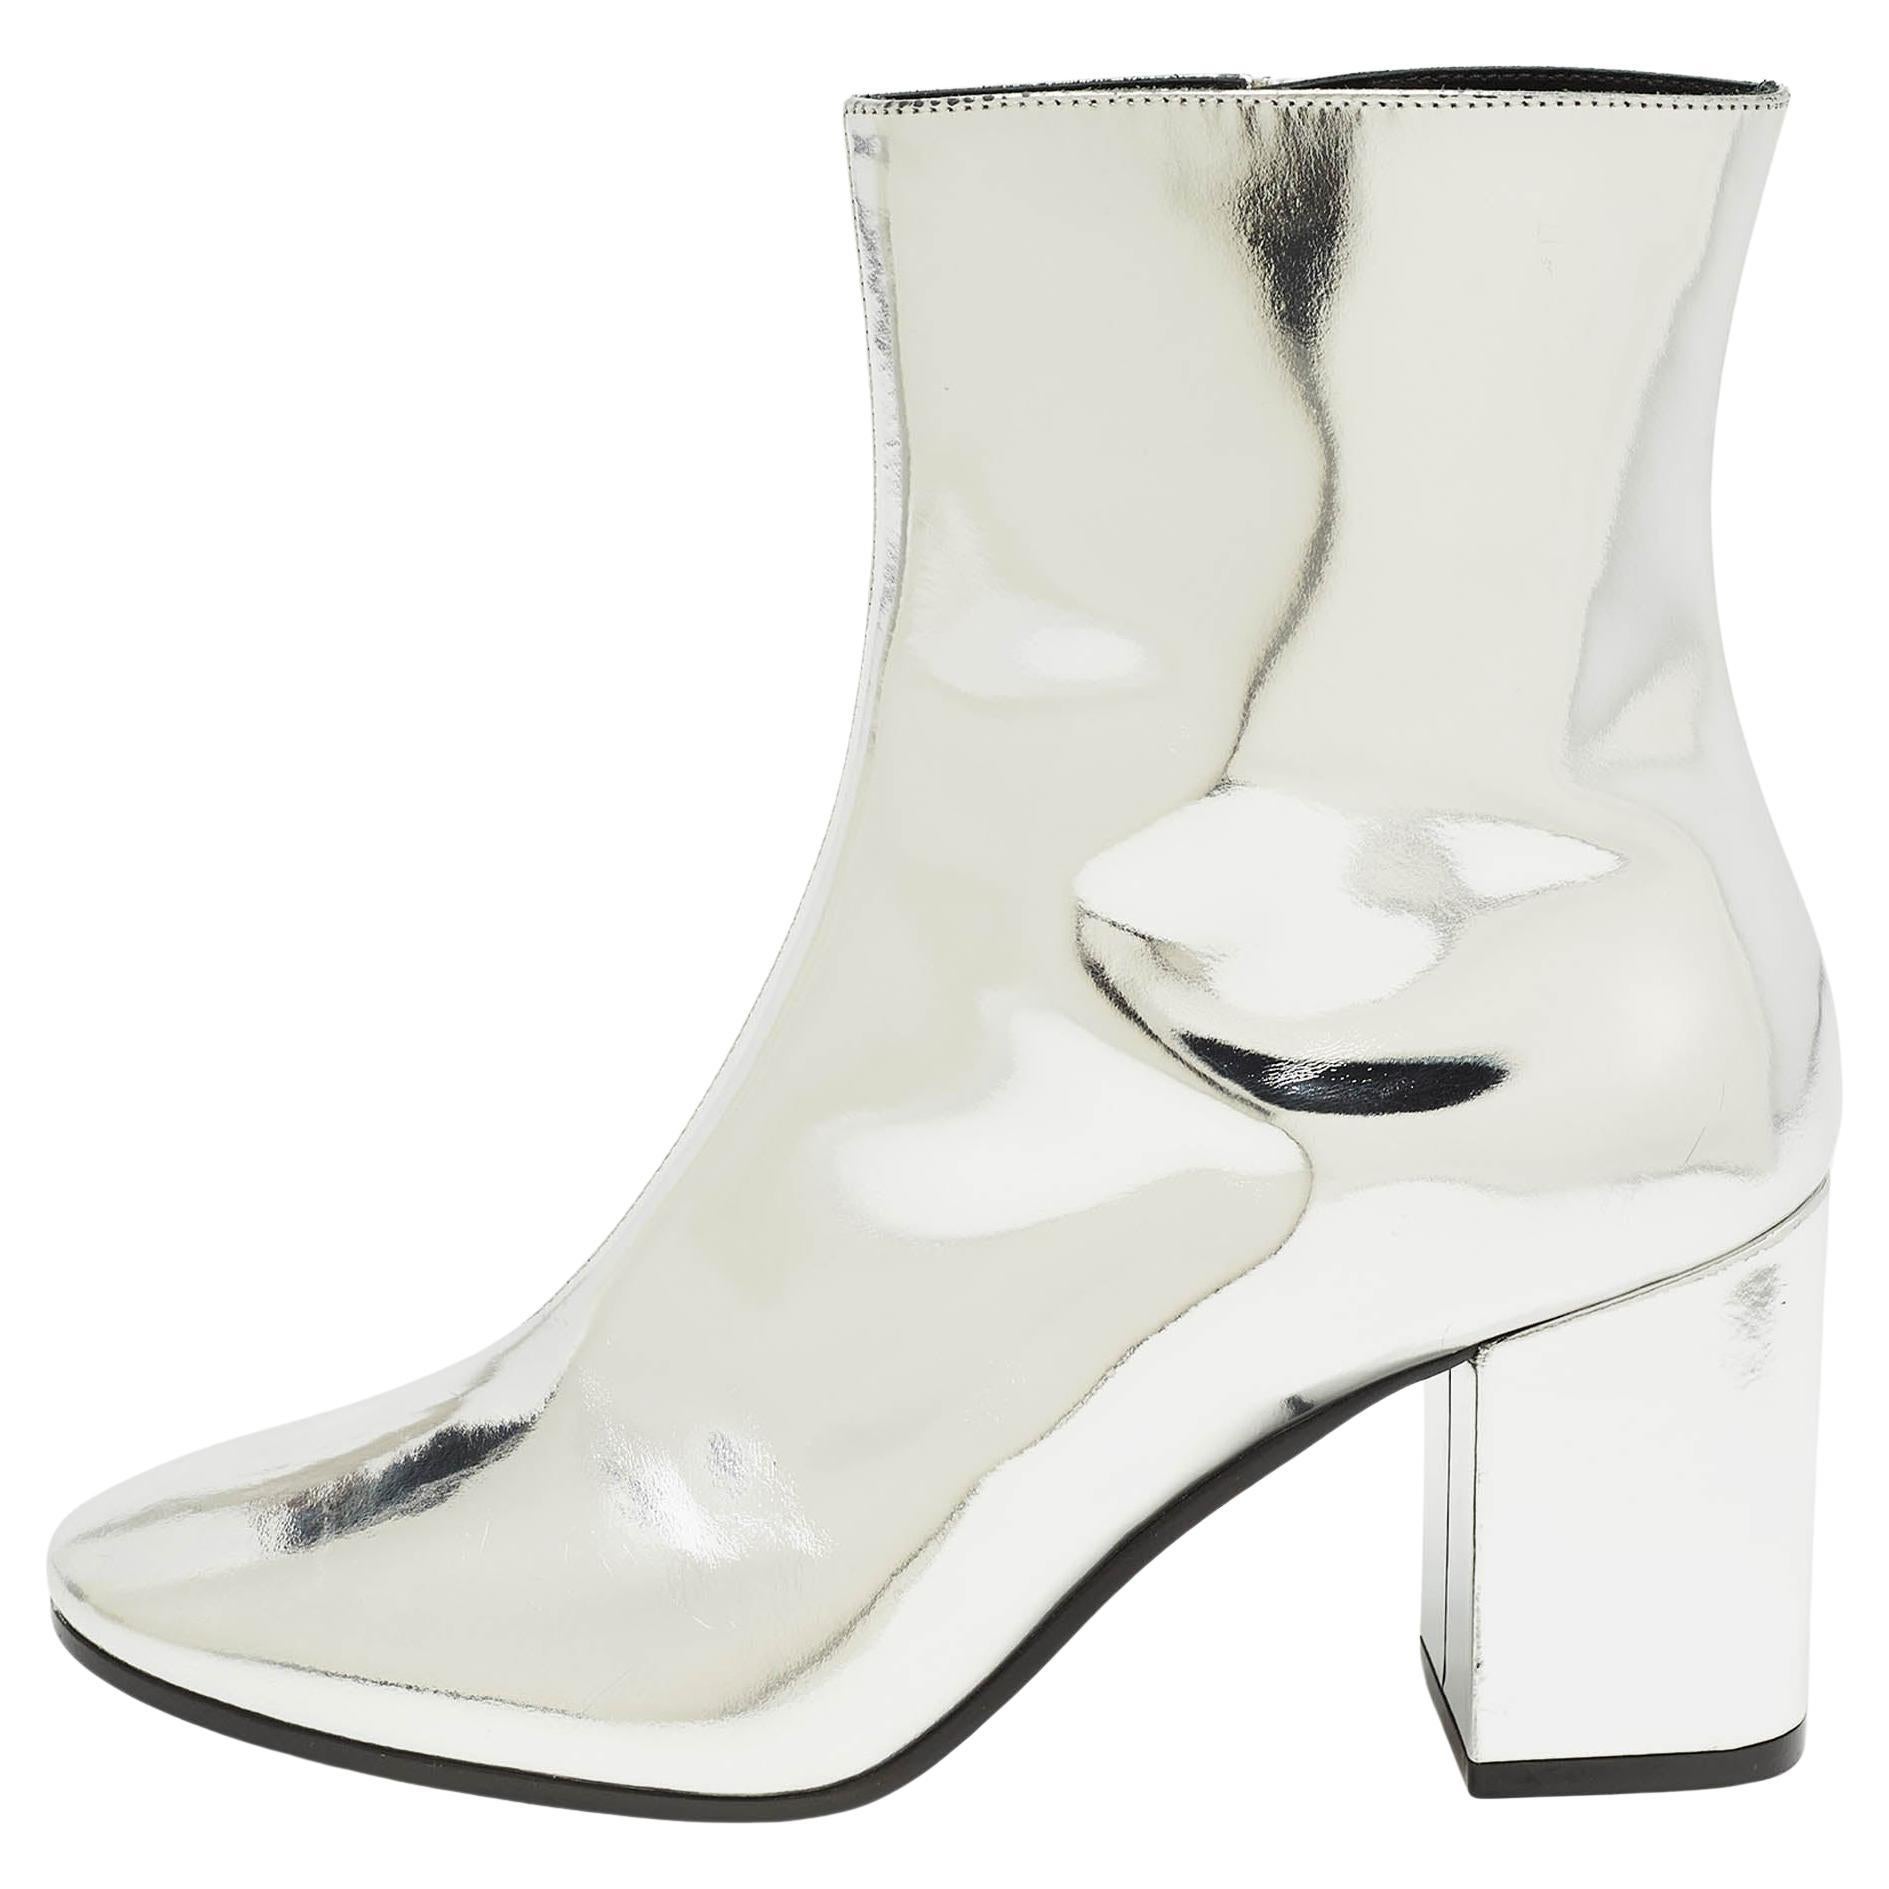 Balenciaga Silver Patent Leather Zip Ankle Boots Size 36 For Sale